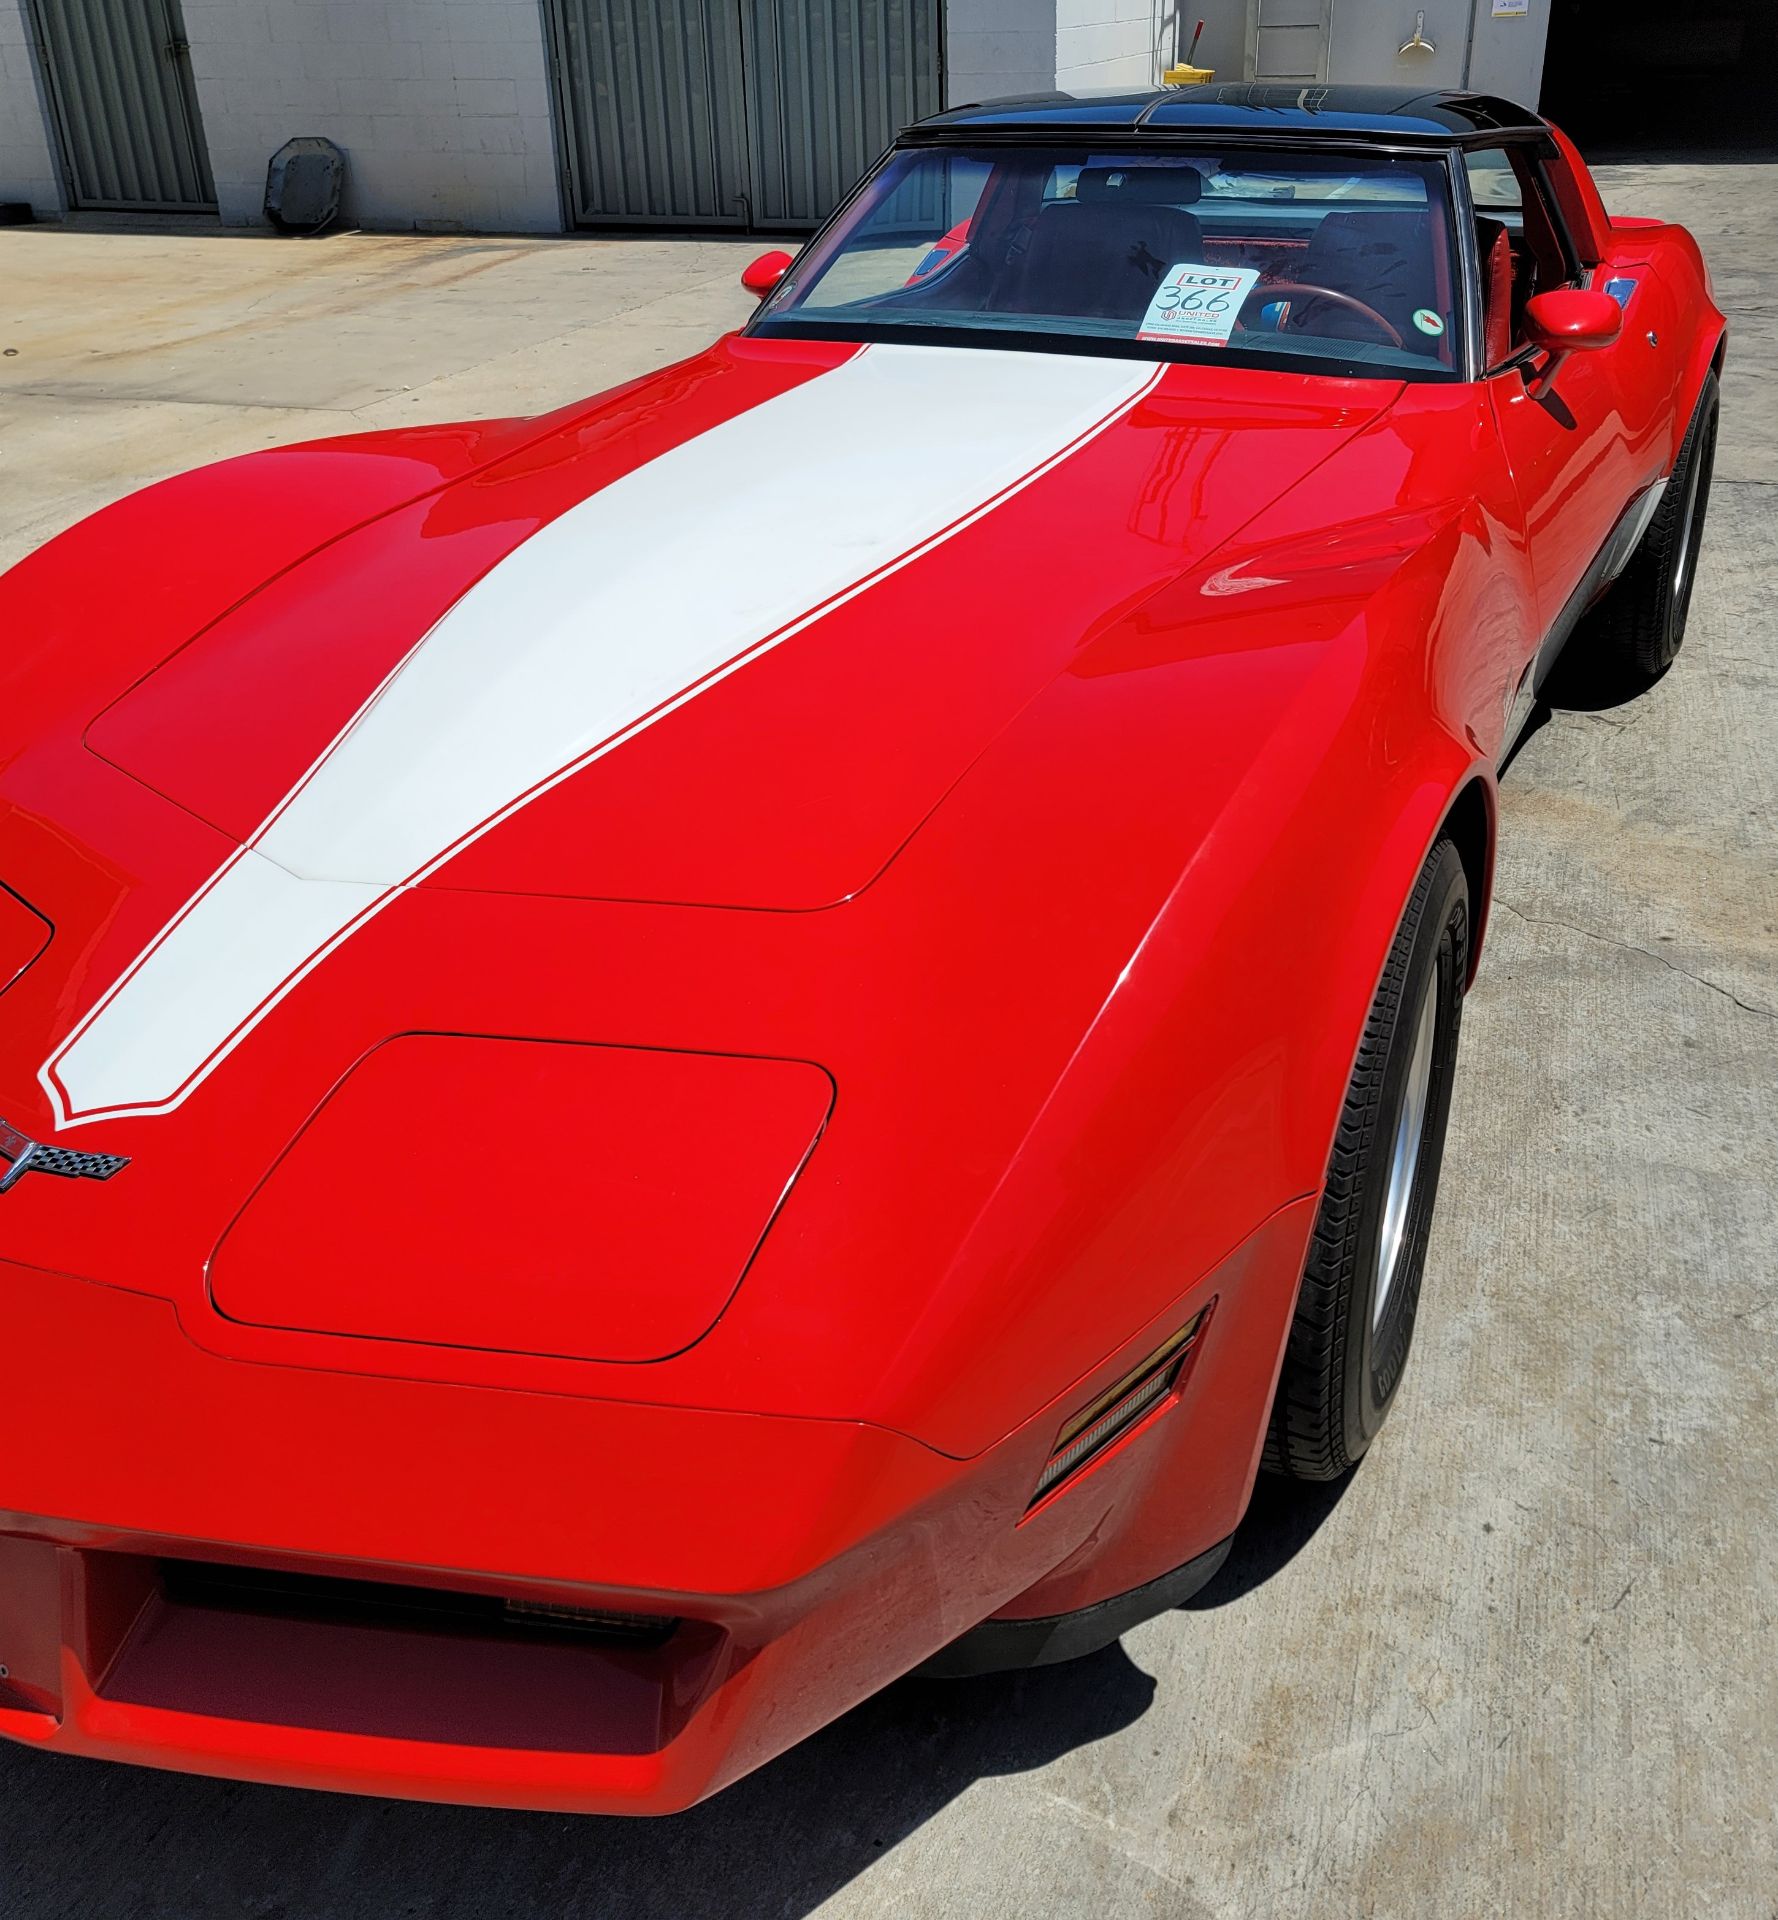 1980 CHEVROLET CORVETTE, WAS VIC EDELBROCK'S PERSONAL CAR BOUGHT FOR R&D, RED INTERIOR, TITLE ONLY. - Image 32 of 70